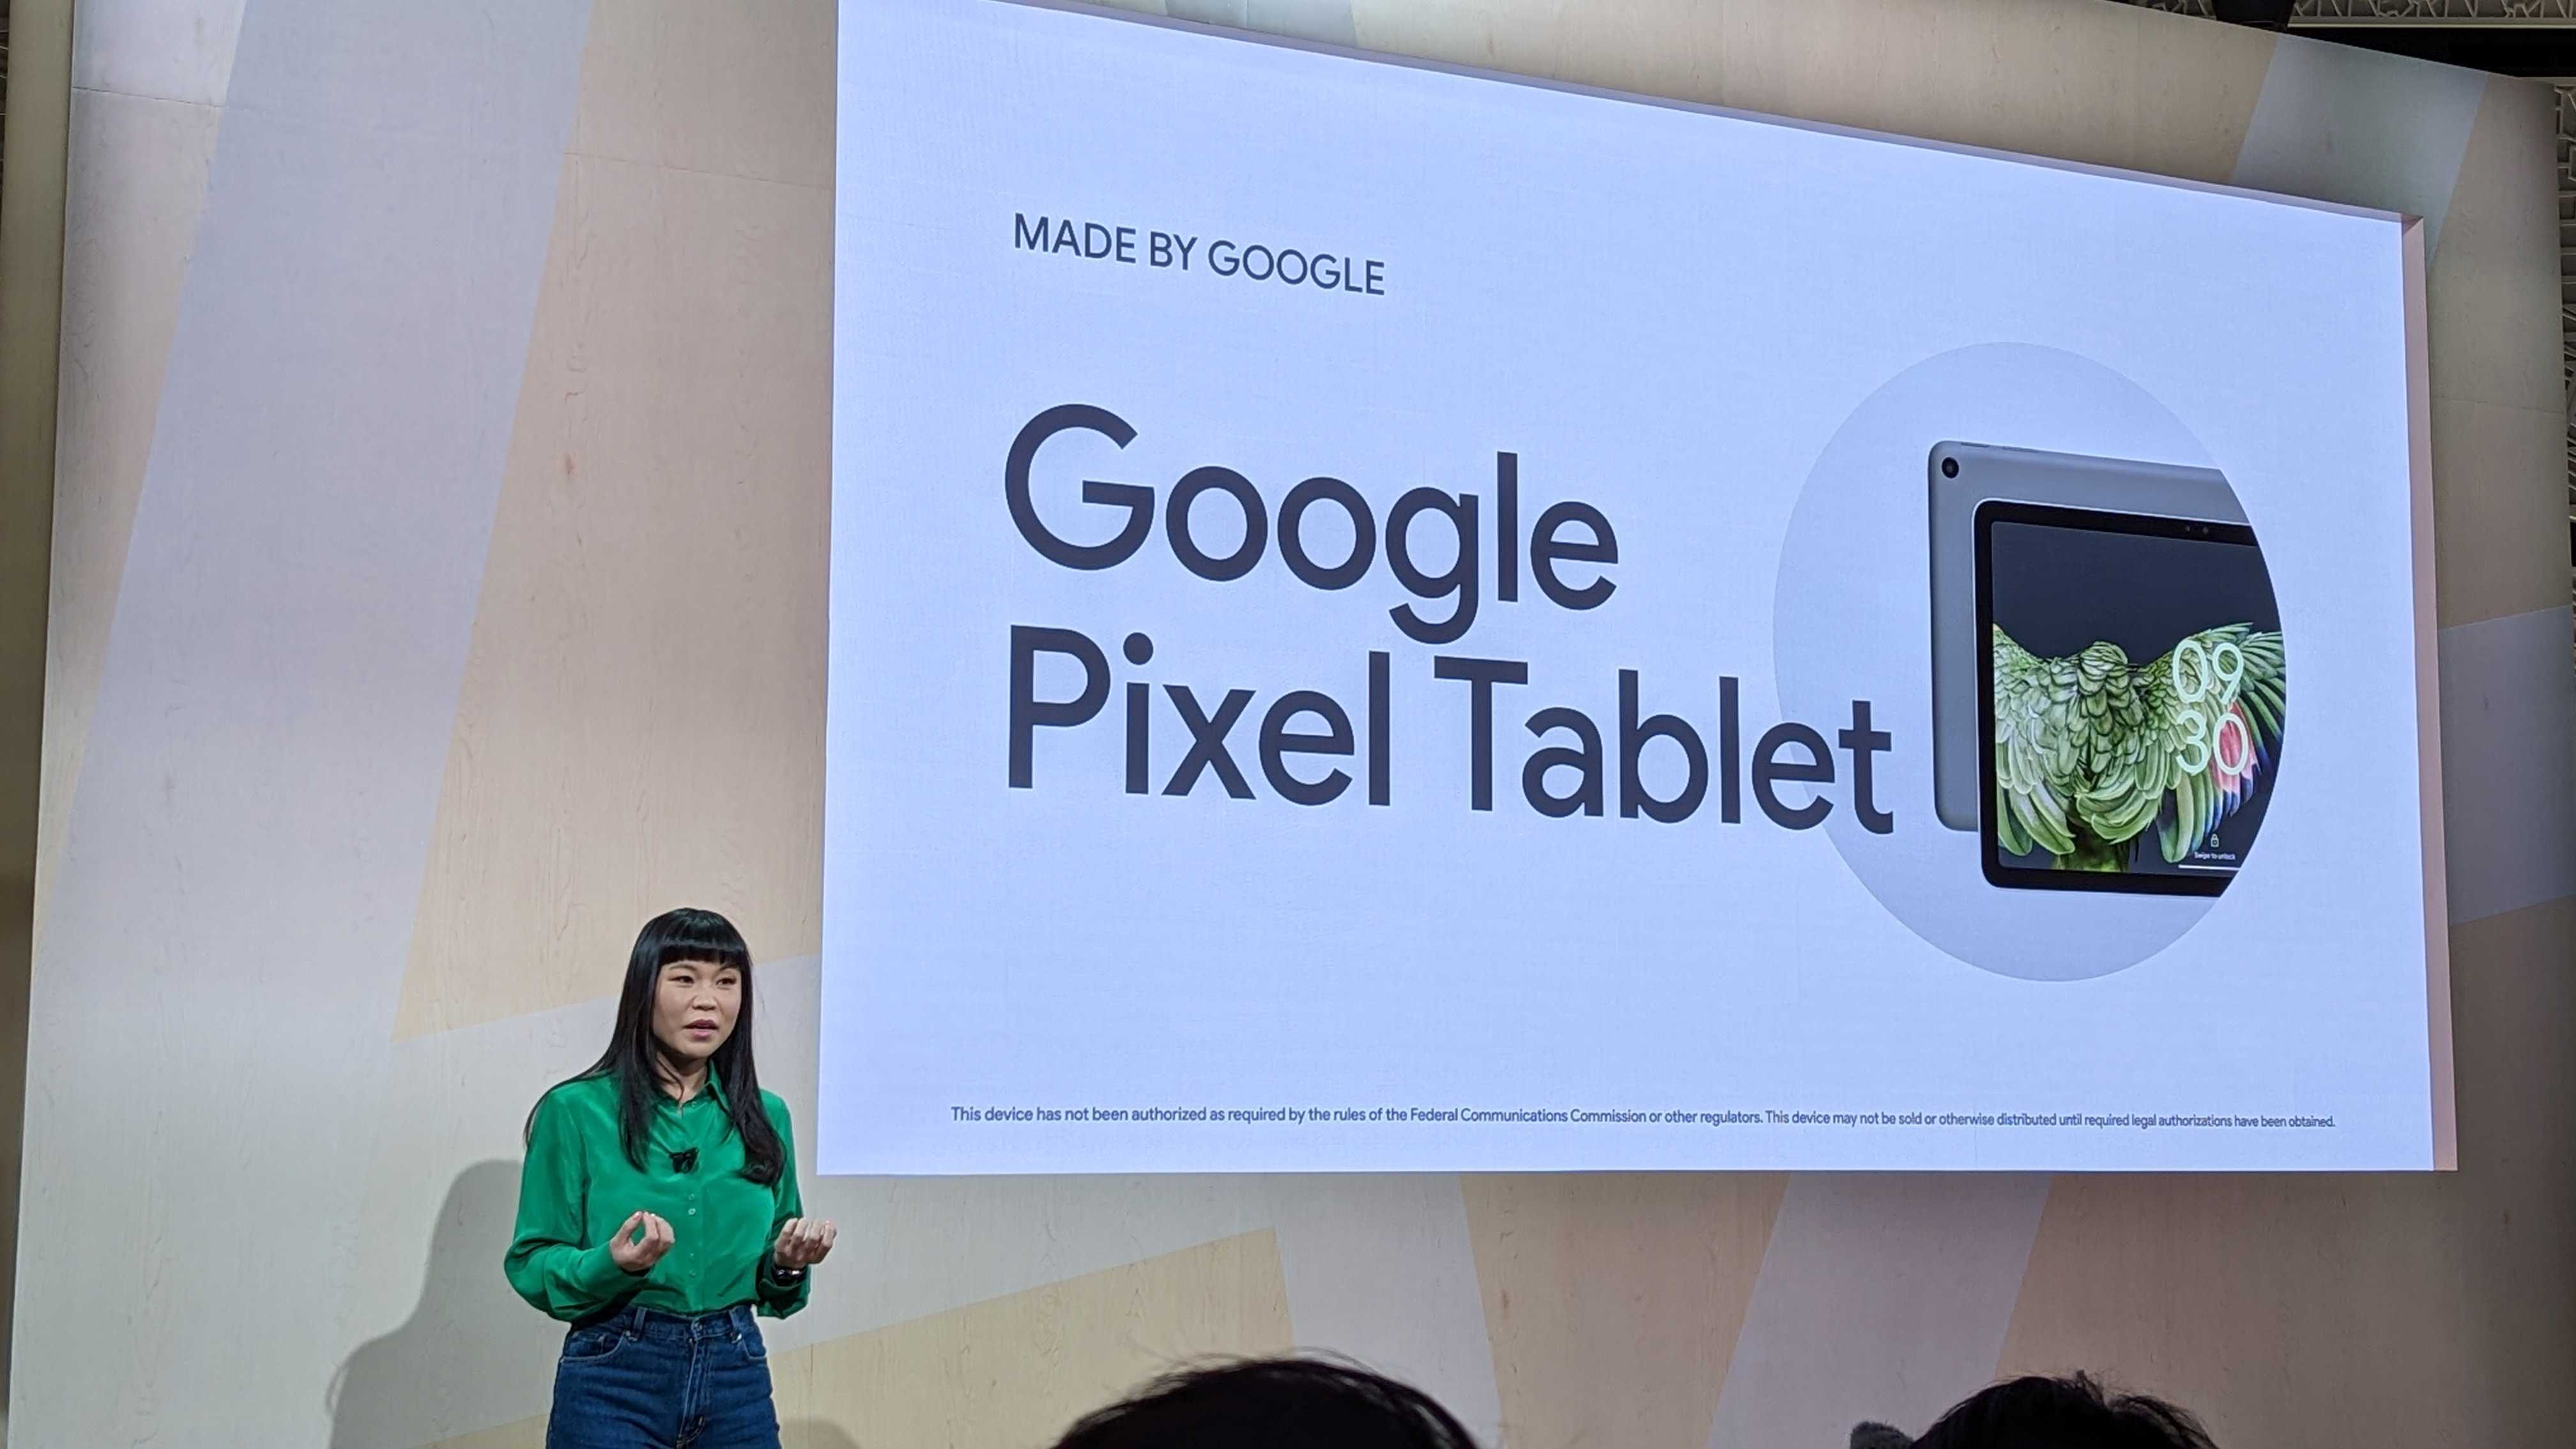 Google Pixel Tablet during Made By Google event